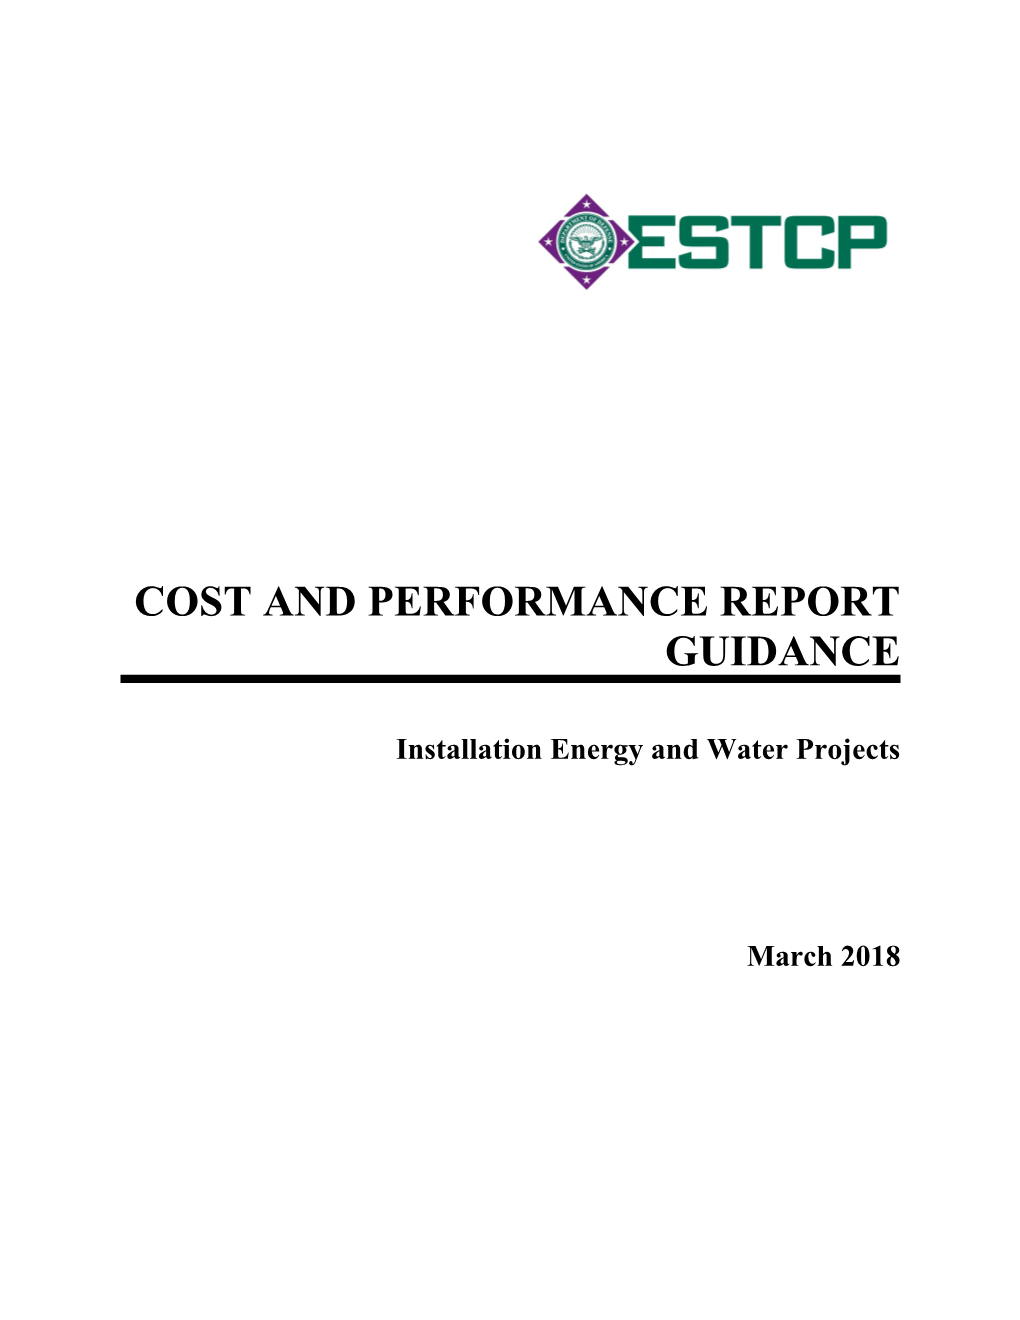 Cost and Performance Report Guidance